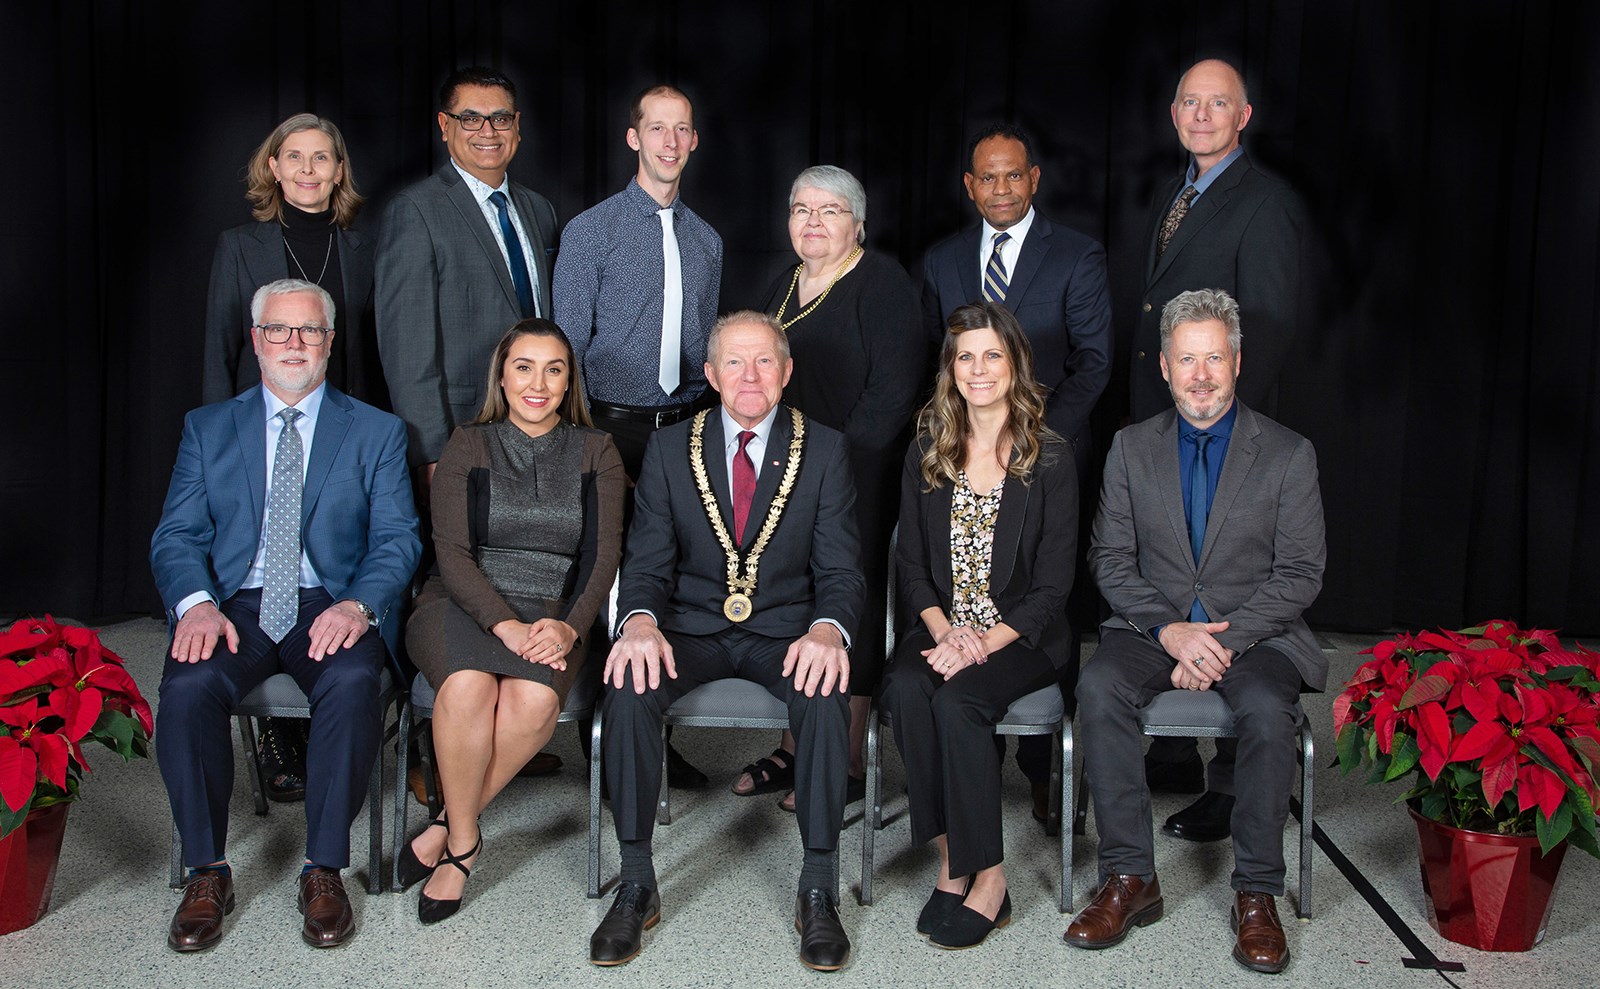 Group photo of Stratford City Council